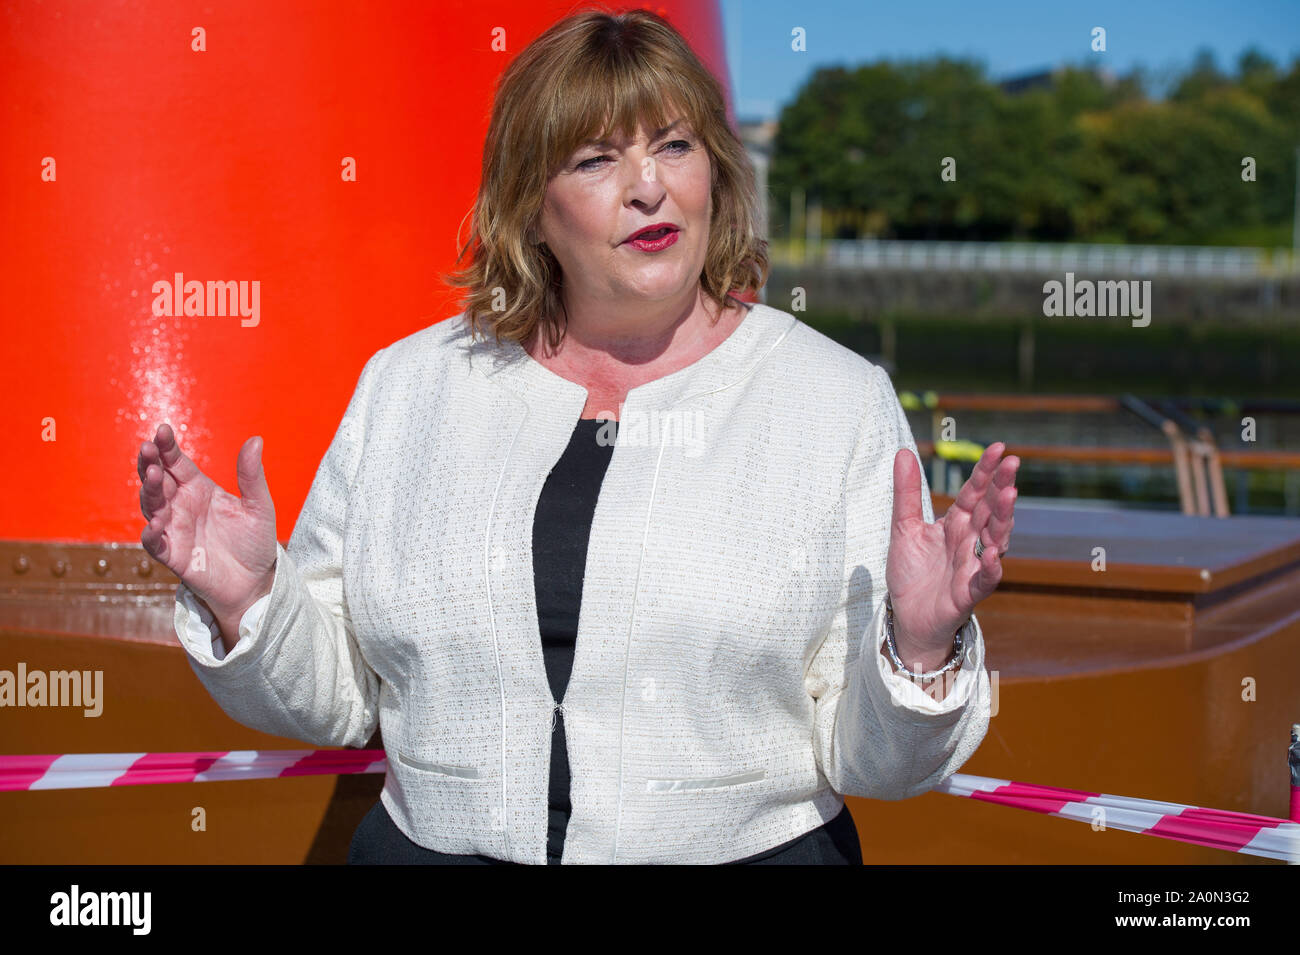 Glasgow, UK. 21 September 2019. PICTURED: Fiona Hyslop MSP - Cabinet Secretary for Culture. The last sea-going paddle steamer in the world will receive £1 million of Scottish Government funding to help it sail again, Culture Secretary Fiona Hyslop has announced.  Ms Hyslop said: “The Waverley has delighted generations of locals and visitors throughout its 70-year history and I am pleased to be able to announce this significant financial commitment to help the historic paddle steamer set sail once again. Credit: Colin Fisher/Alamy Live News Stock Photo